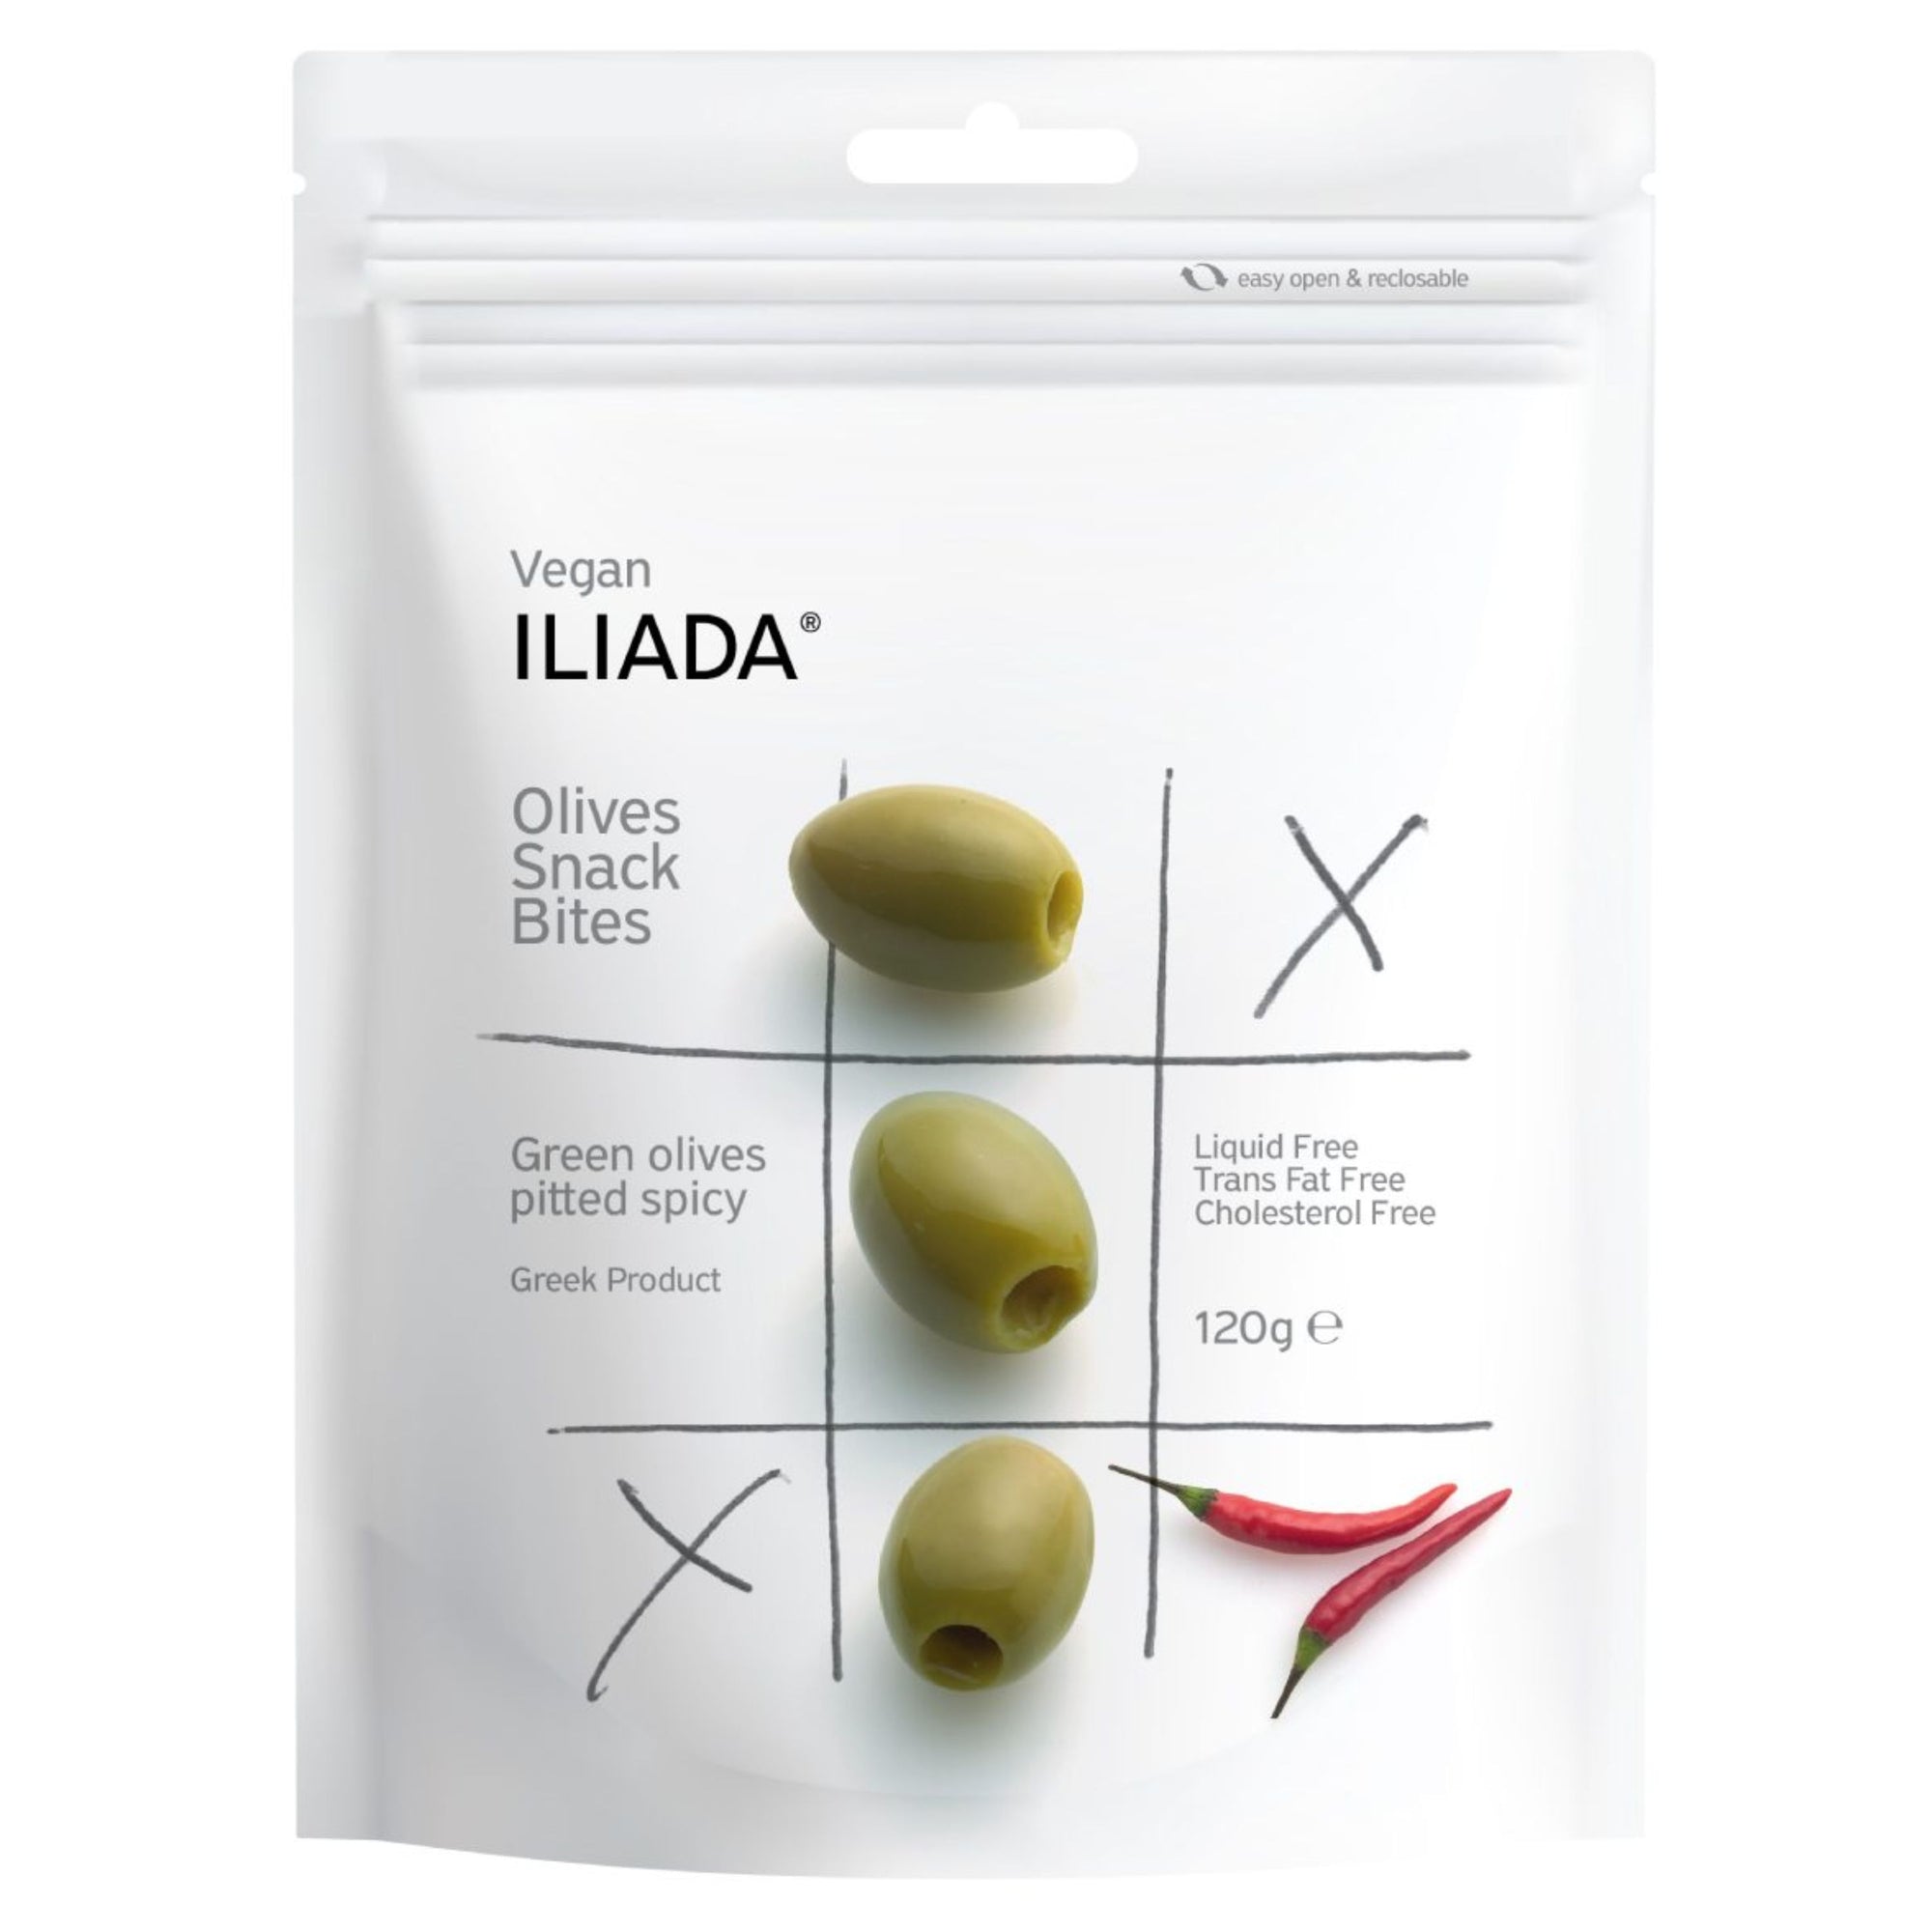 Green Pitted Spicy Olives Snack Bites 'Iliada' 120g